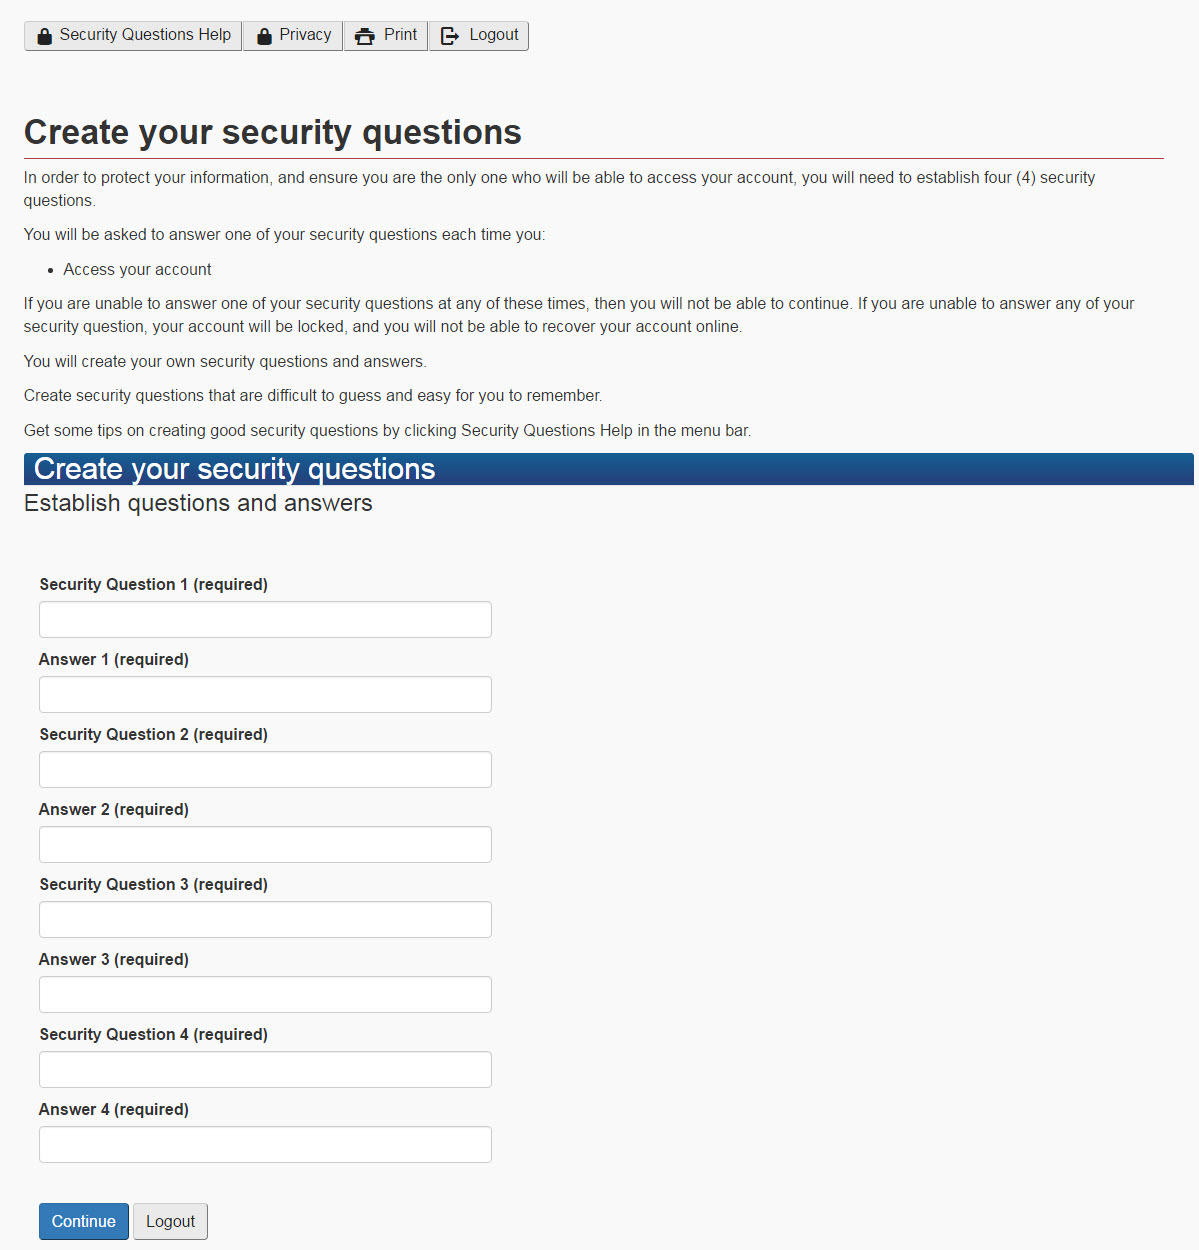 Image of security questions form, as described above.